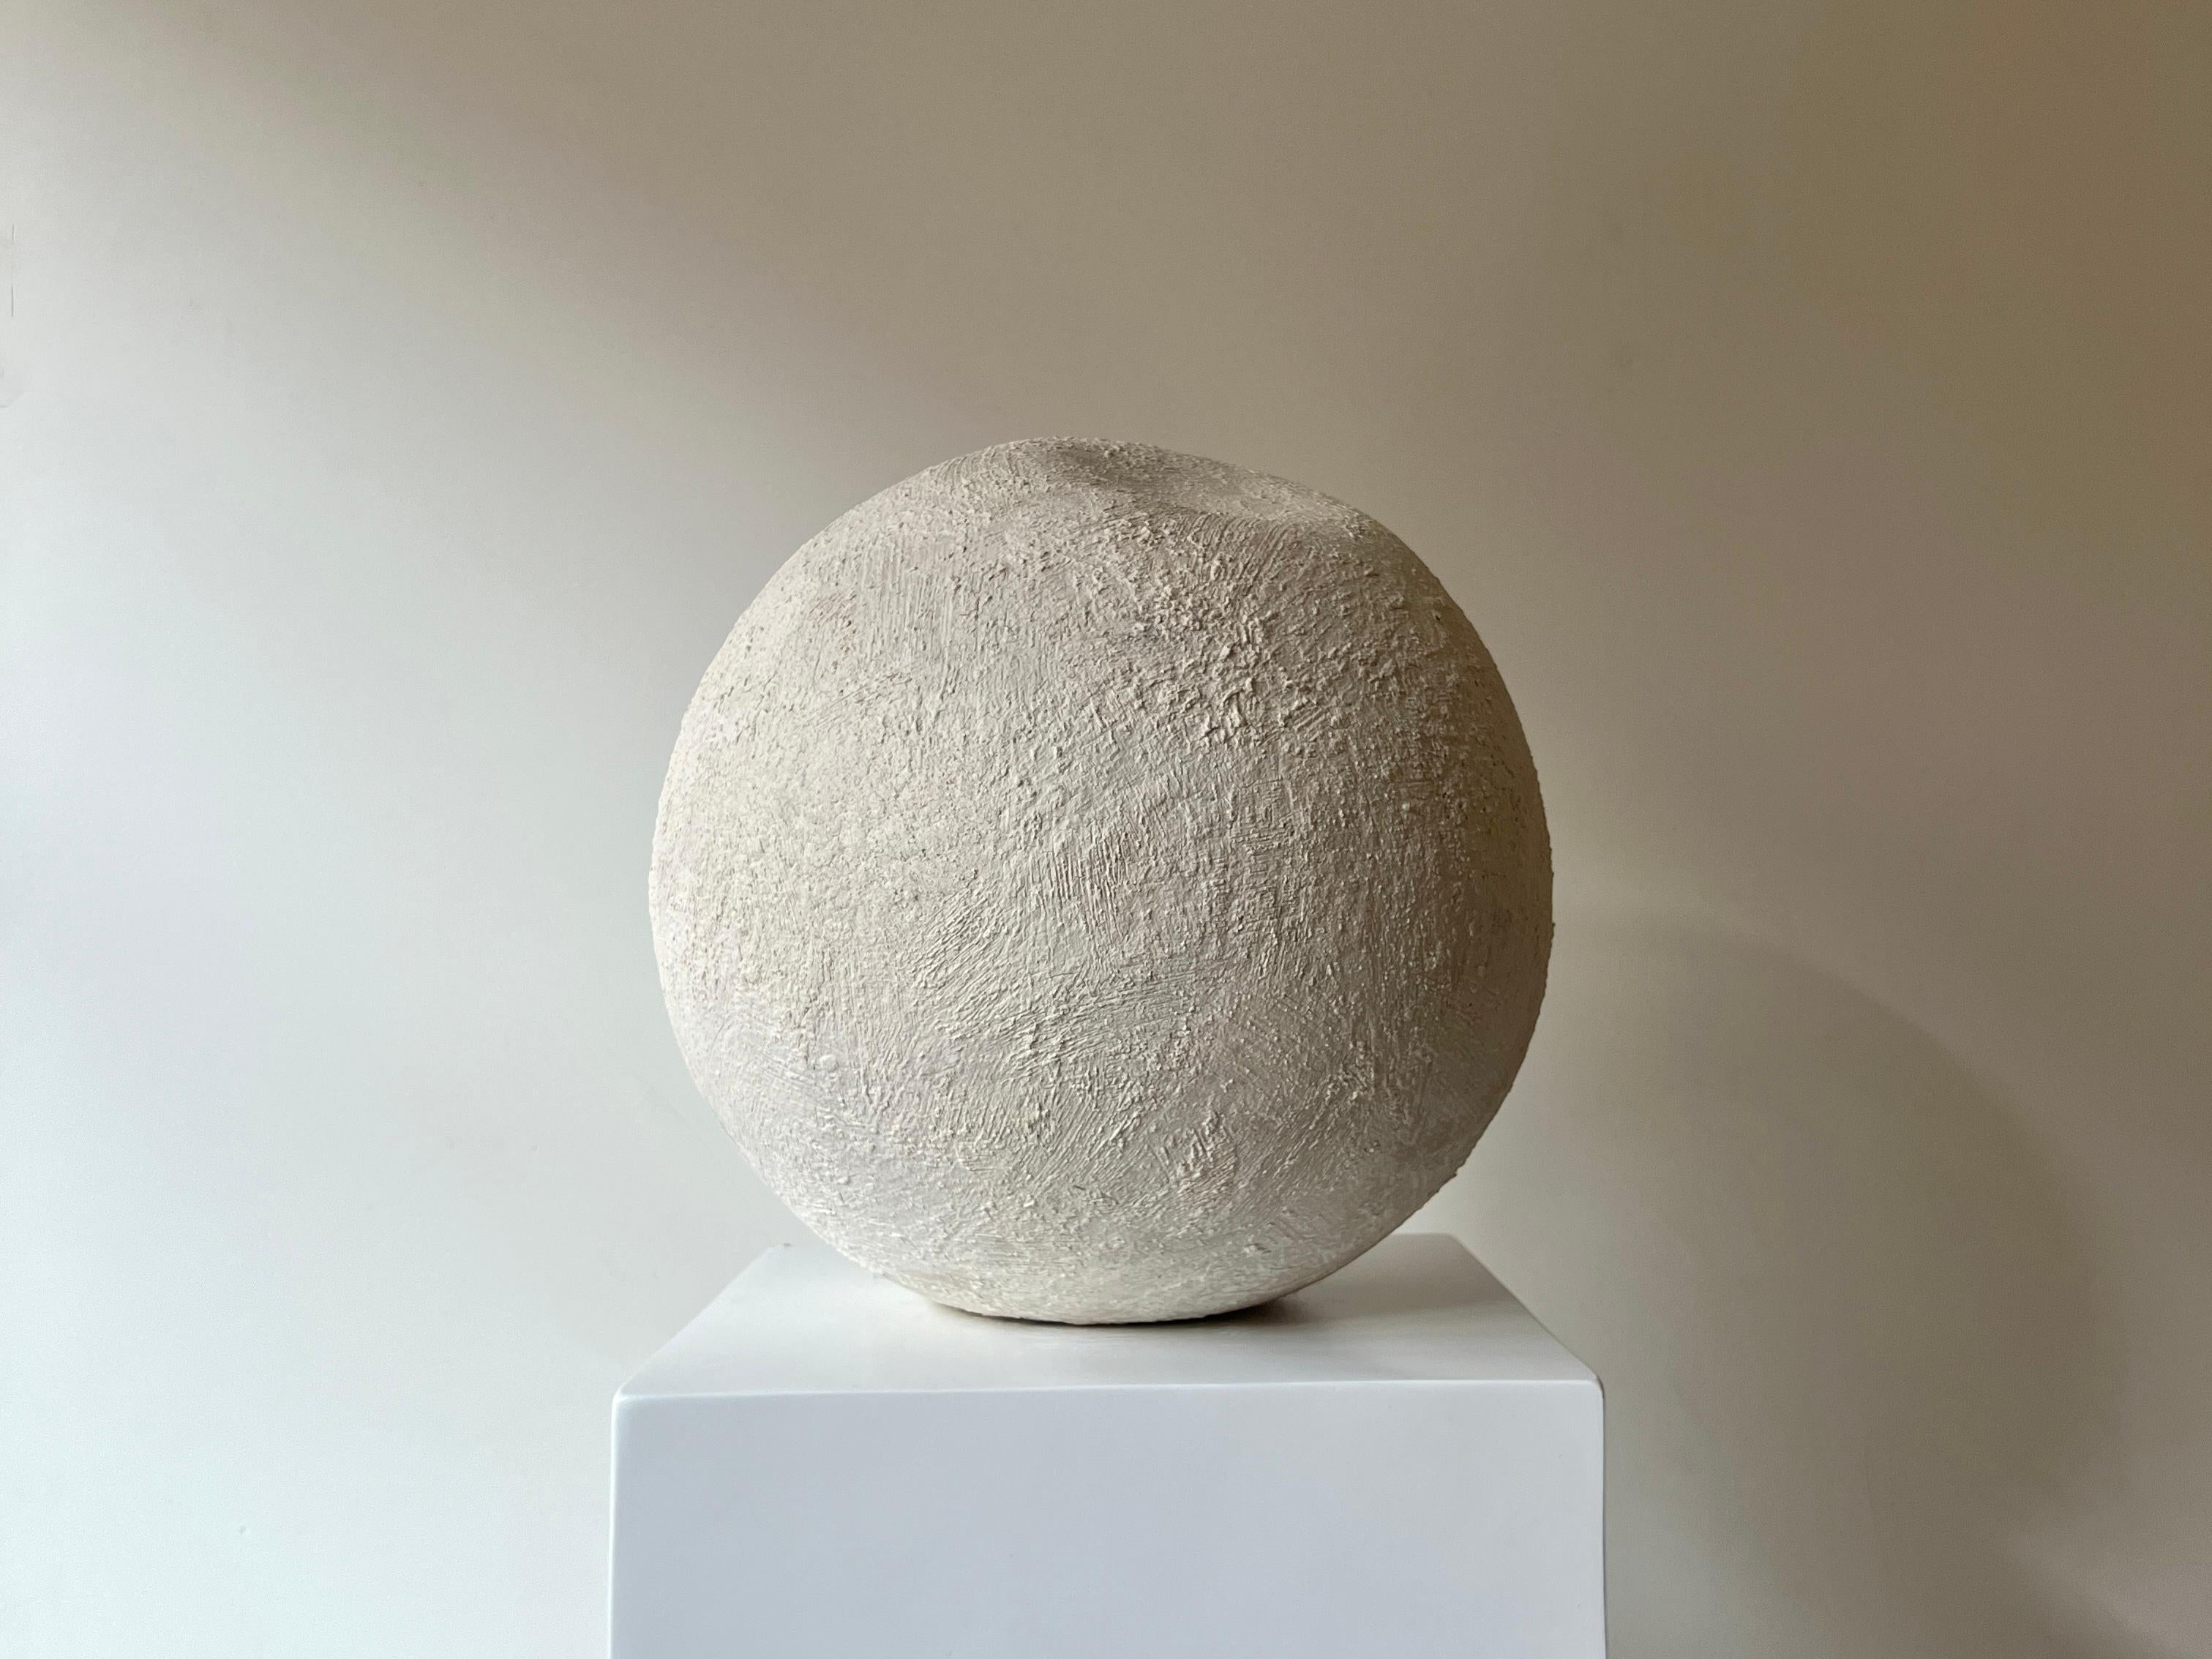 White Sphere II by Laura Pasquino
One of a kind
Dimensions: Ø 38 x H 38 cm
Materials: stoneware, porcelain
Finishing: textured porcelain

Laura Pasquino
Incorporating references from ancient Korean ceramics as well as principles of Japanese